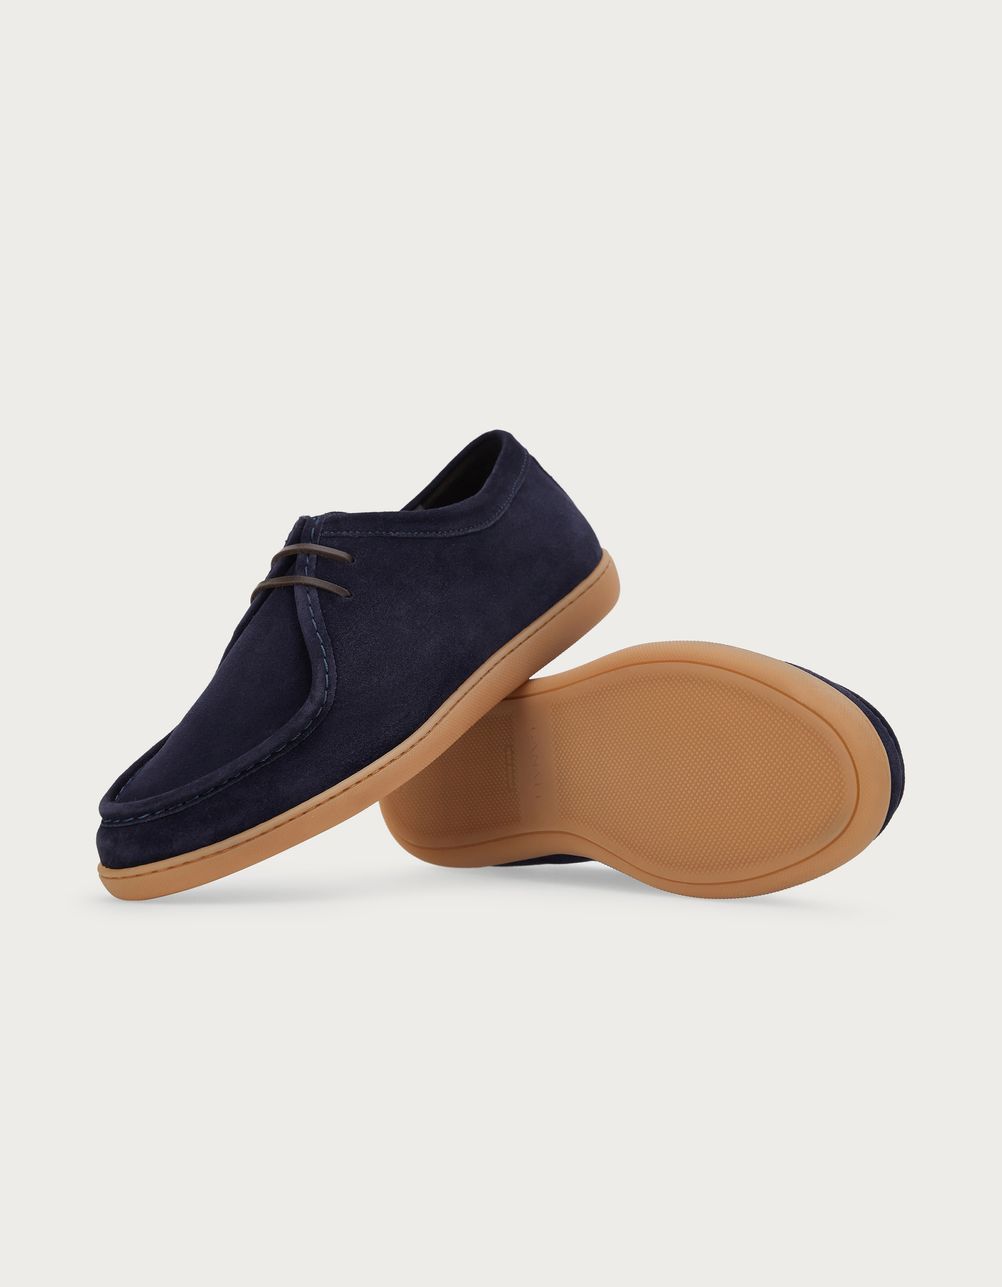 Wallaby shoes in blue suede